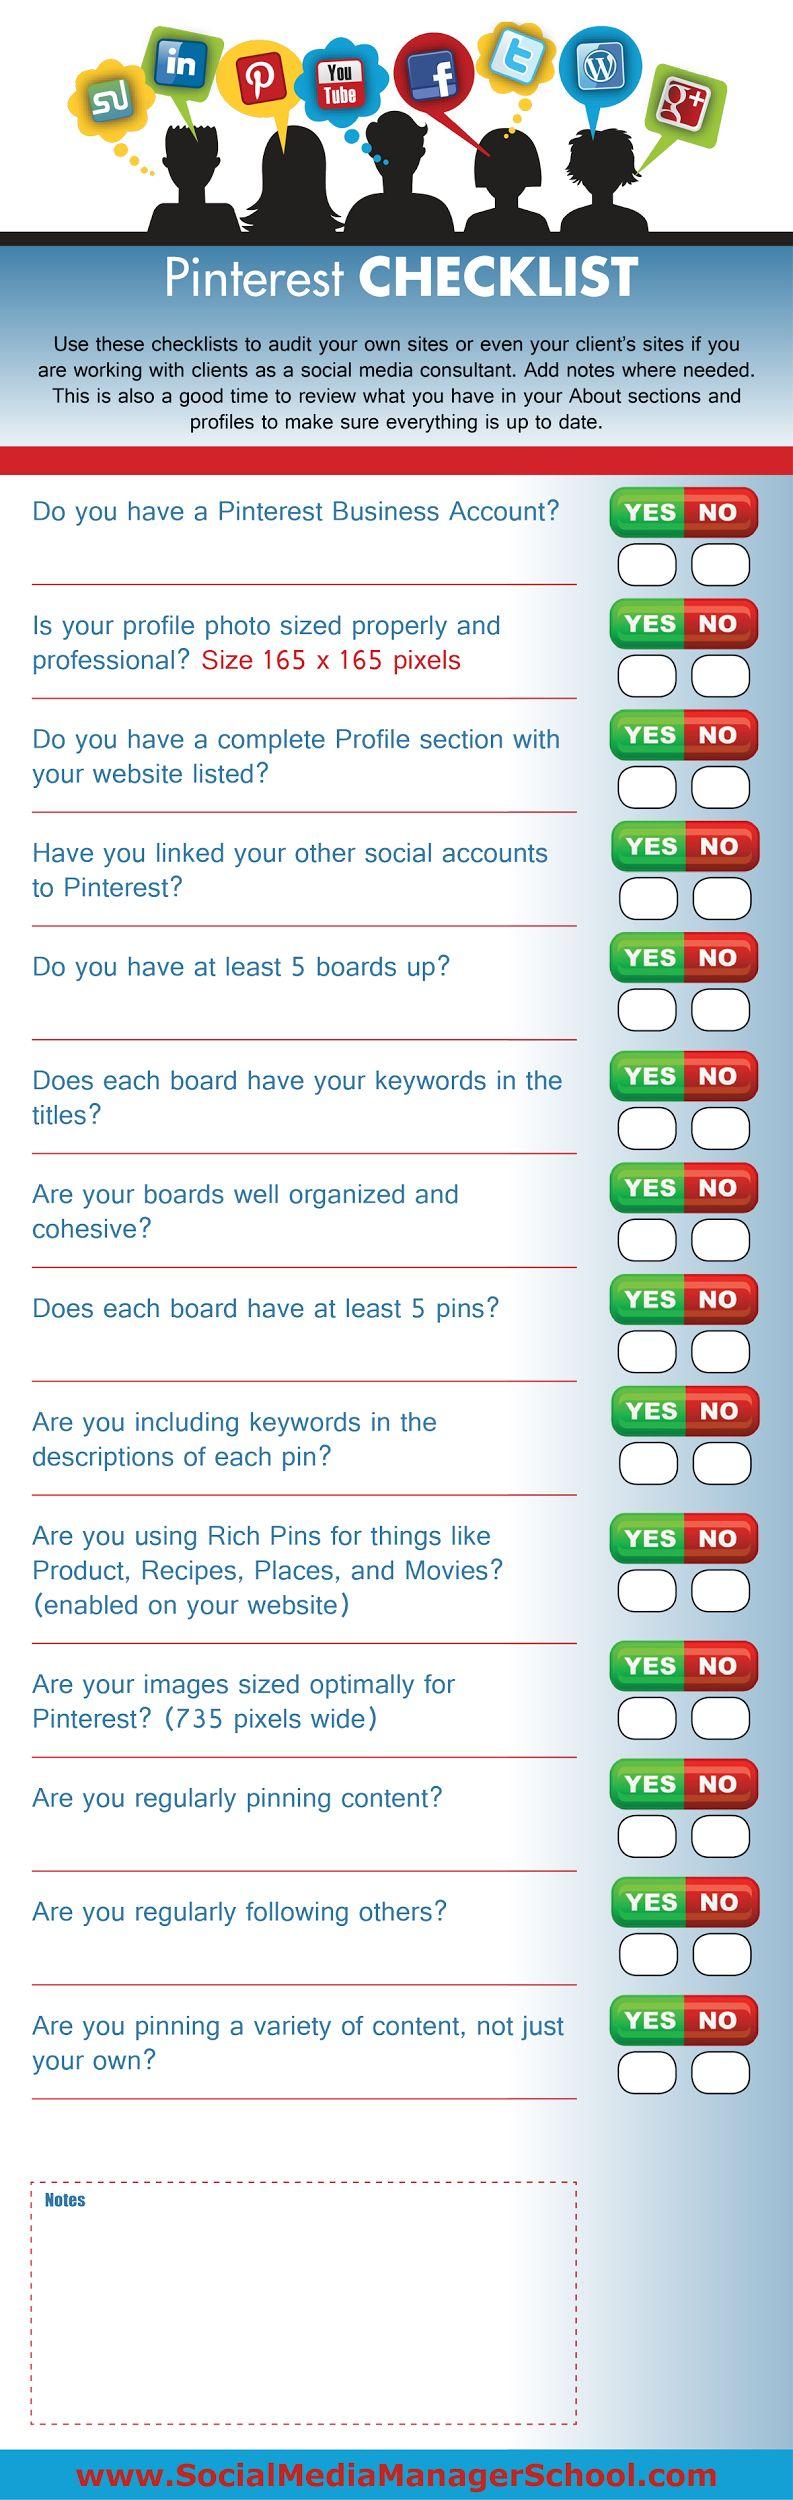 Highlights Business account with verified website At least 5 boards with 5 Pins